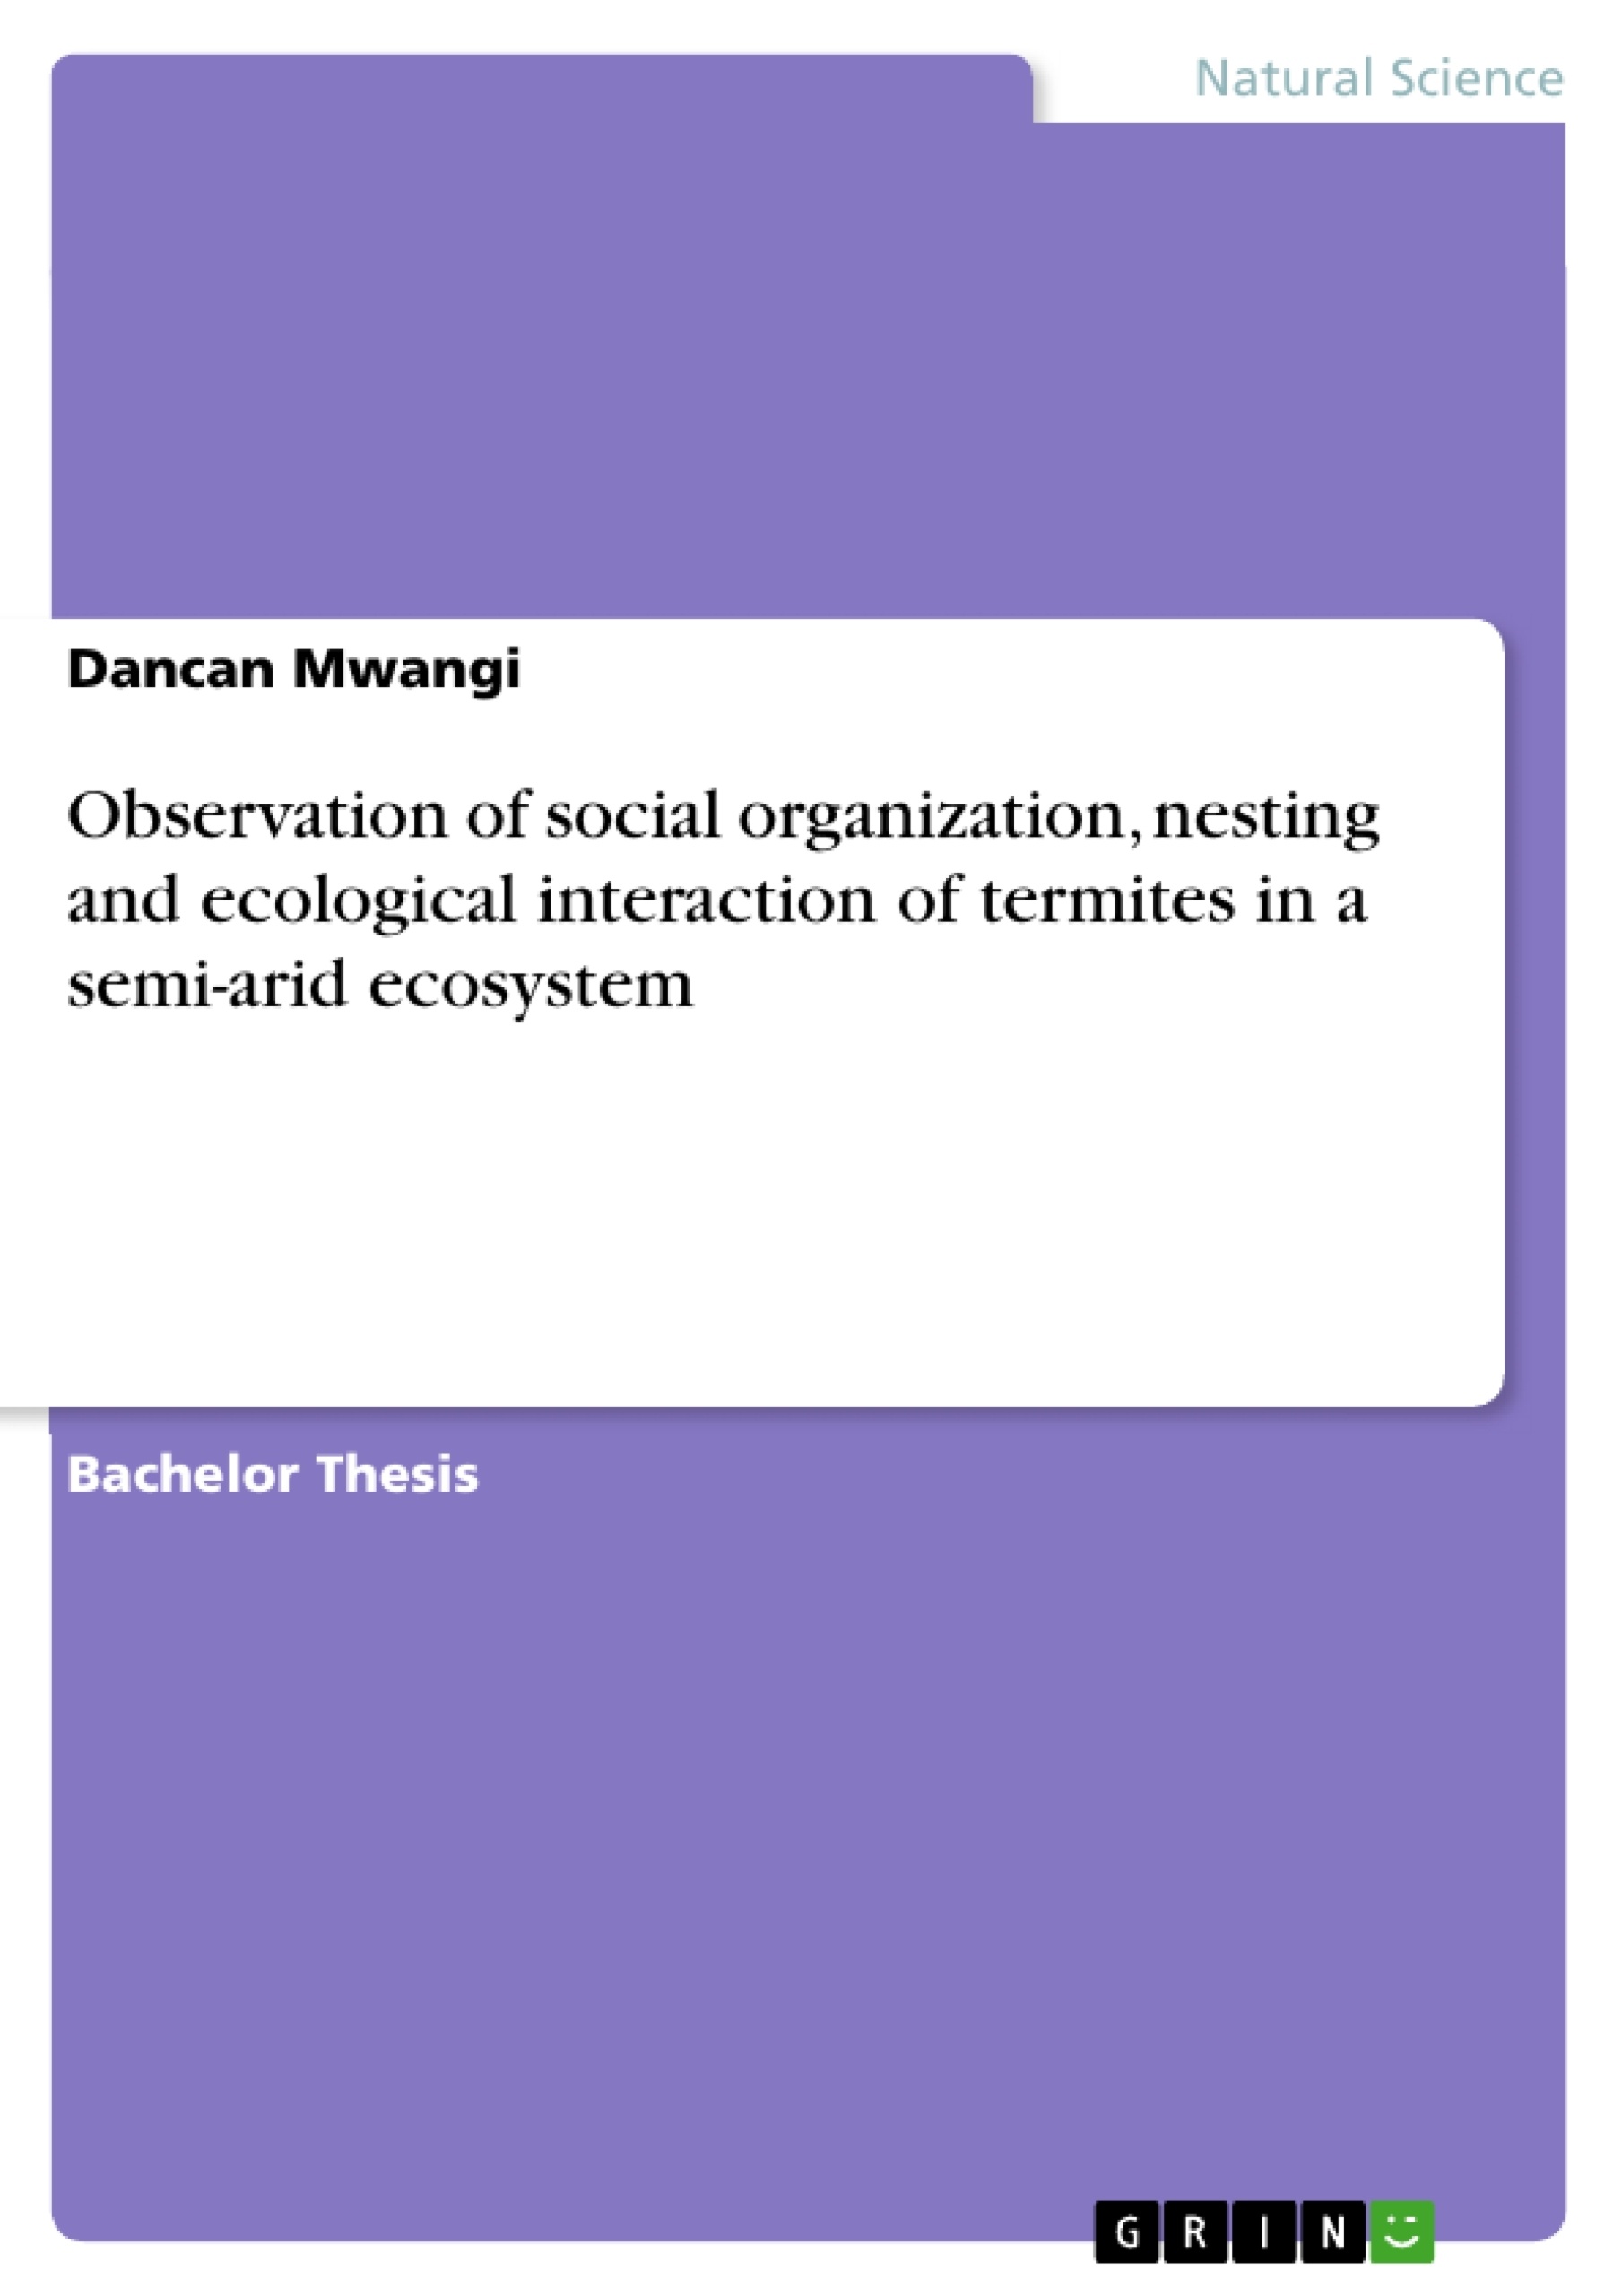 Título: Observation of social organization, nesting and ecological interaction of termites in a semi-arid ecosystem